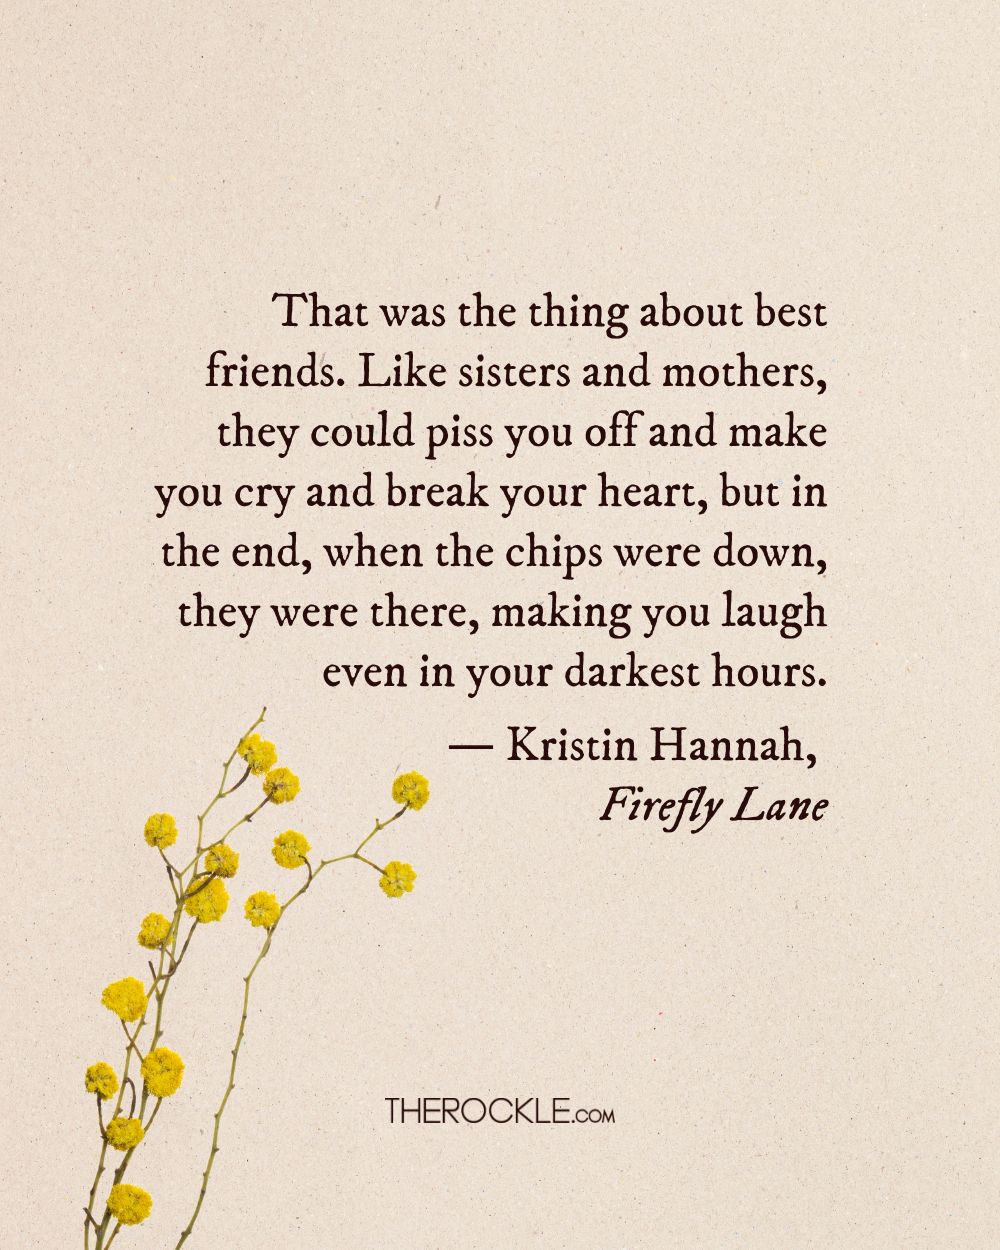 Kristin Hannah's quote about friendship